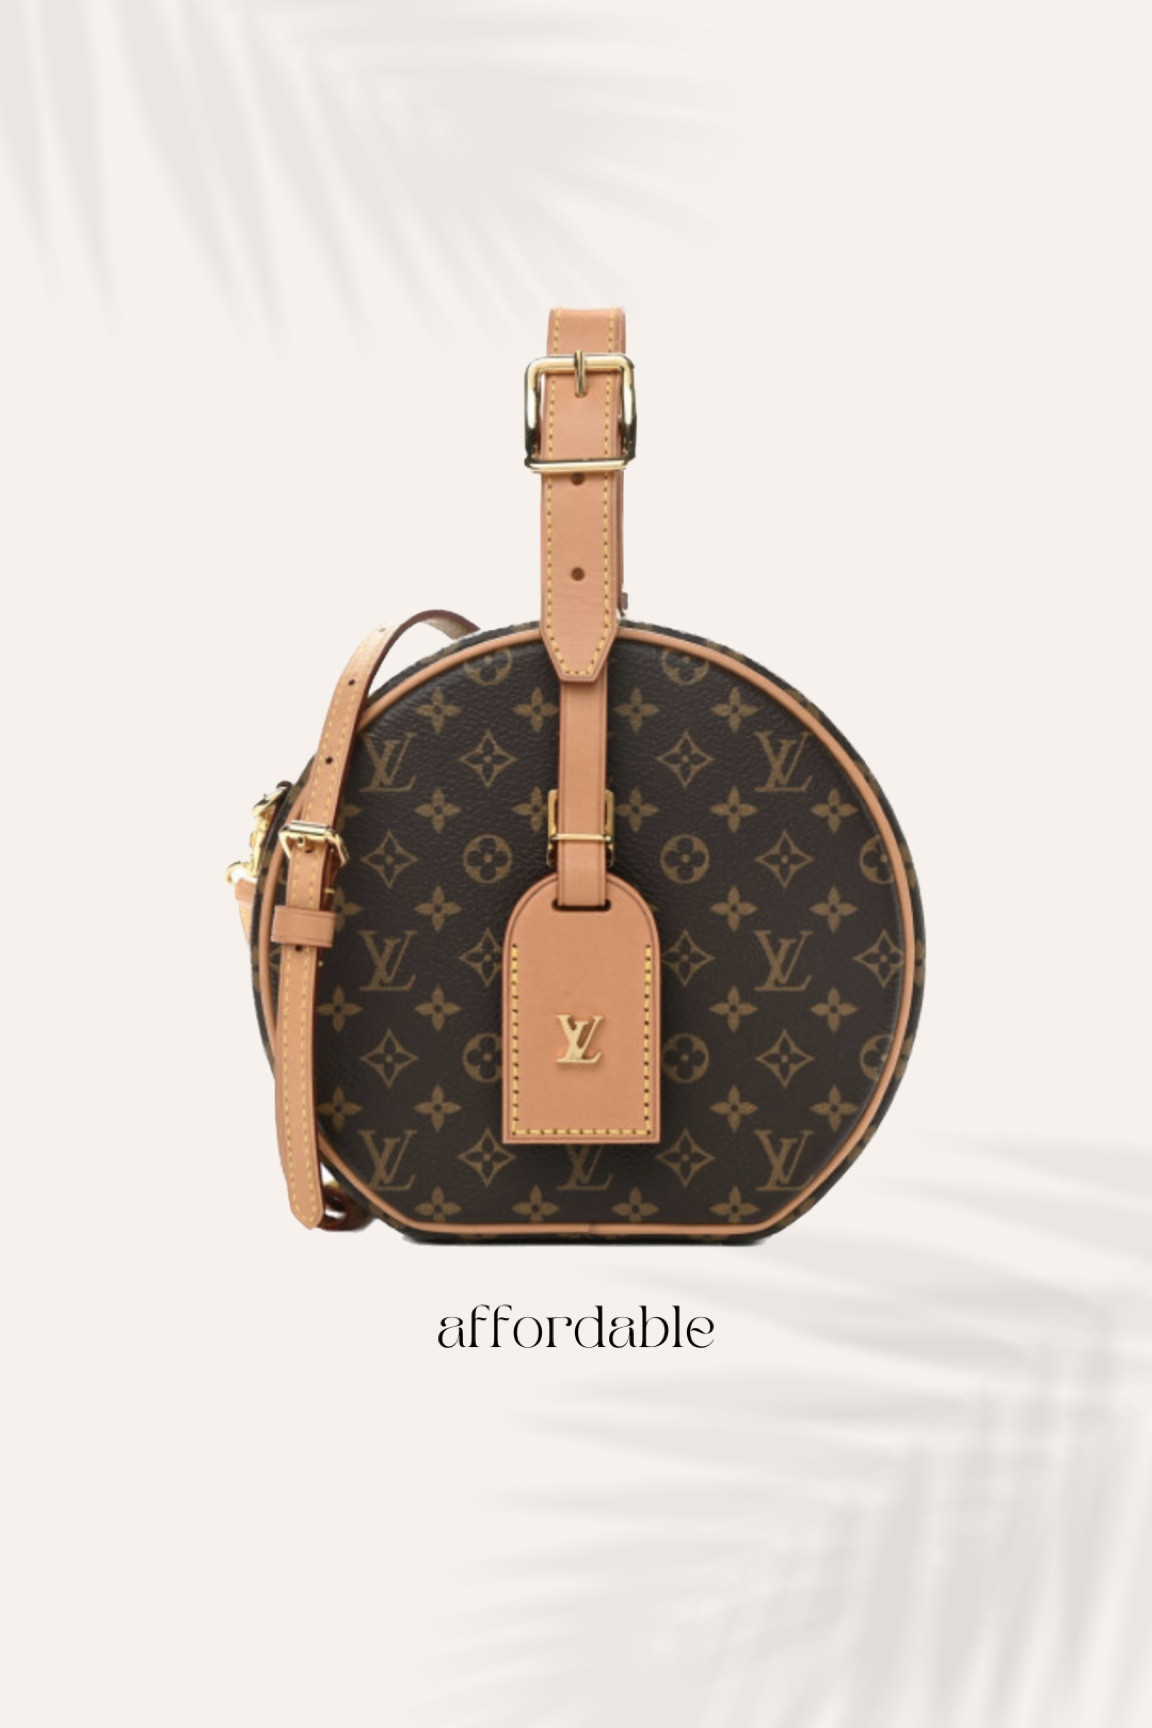 How to Find LV Dupes on DHgate 